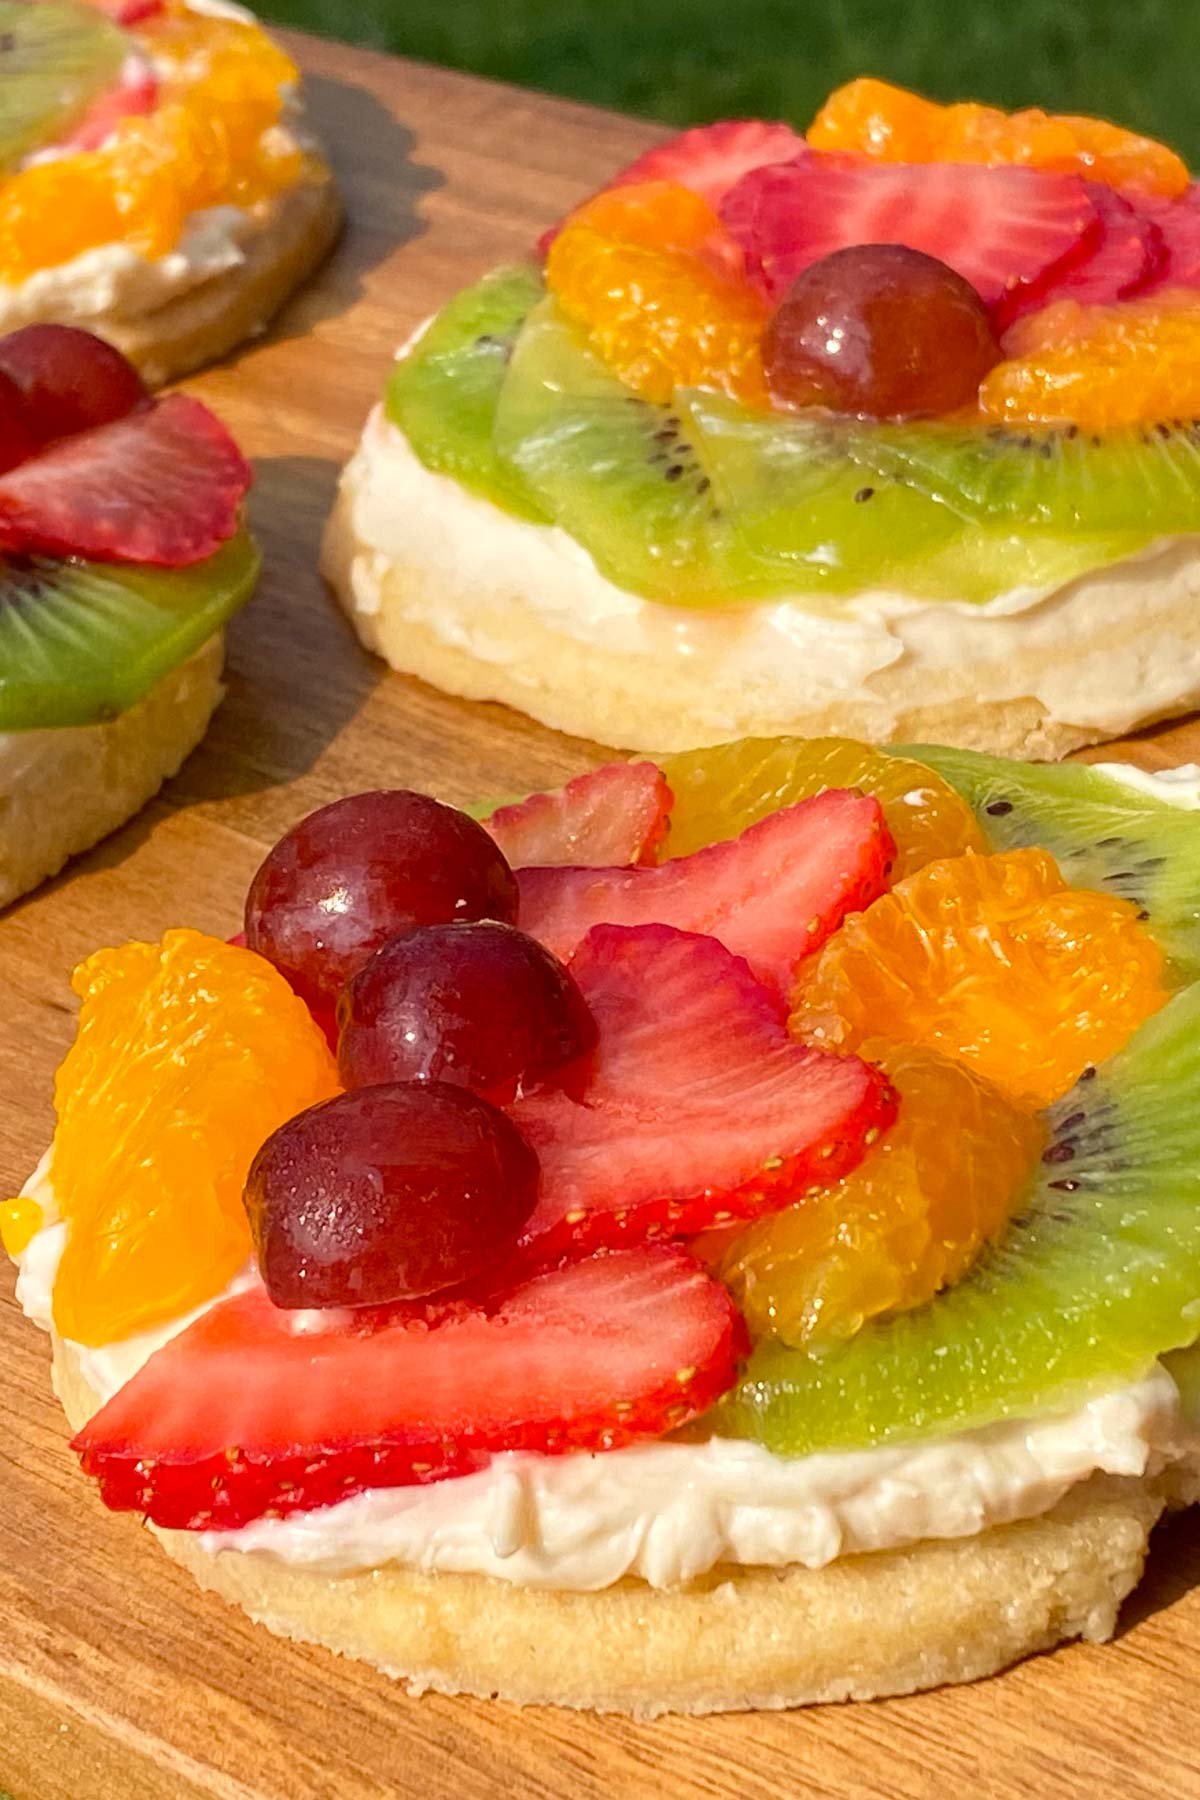 Sugar cookies topped with cream cheese and fresh fruit.